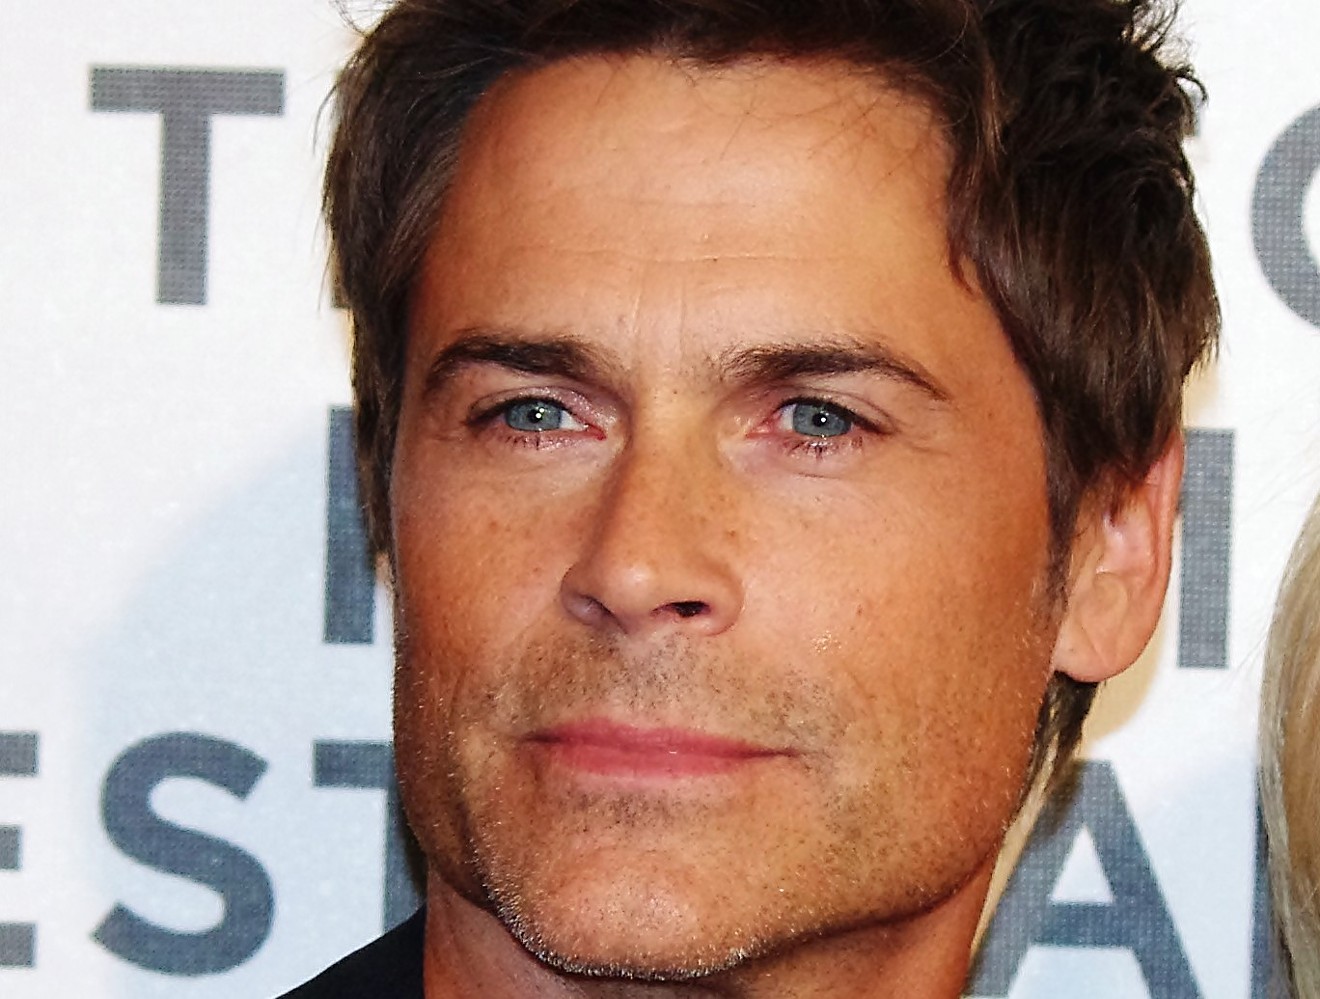 Rob Lowe will be coming to Denver on October 1.